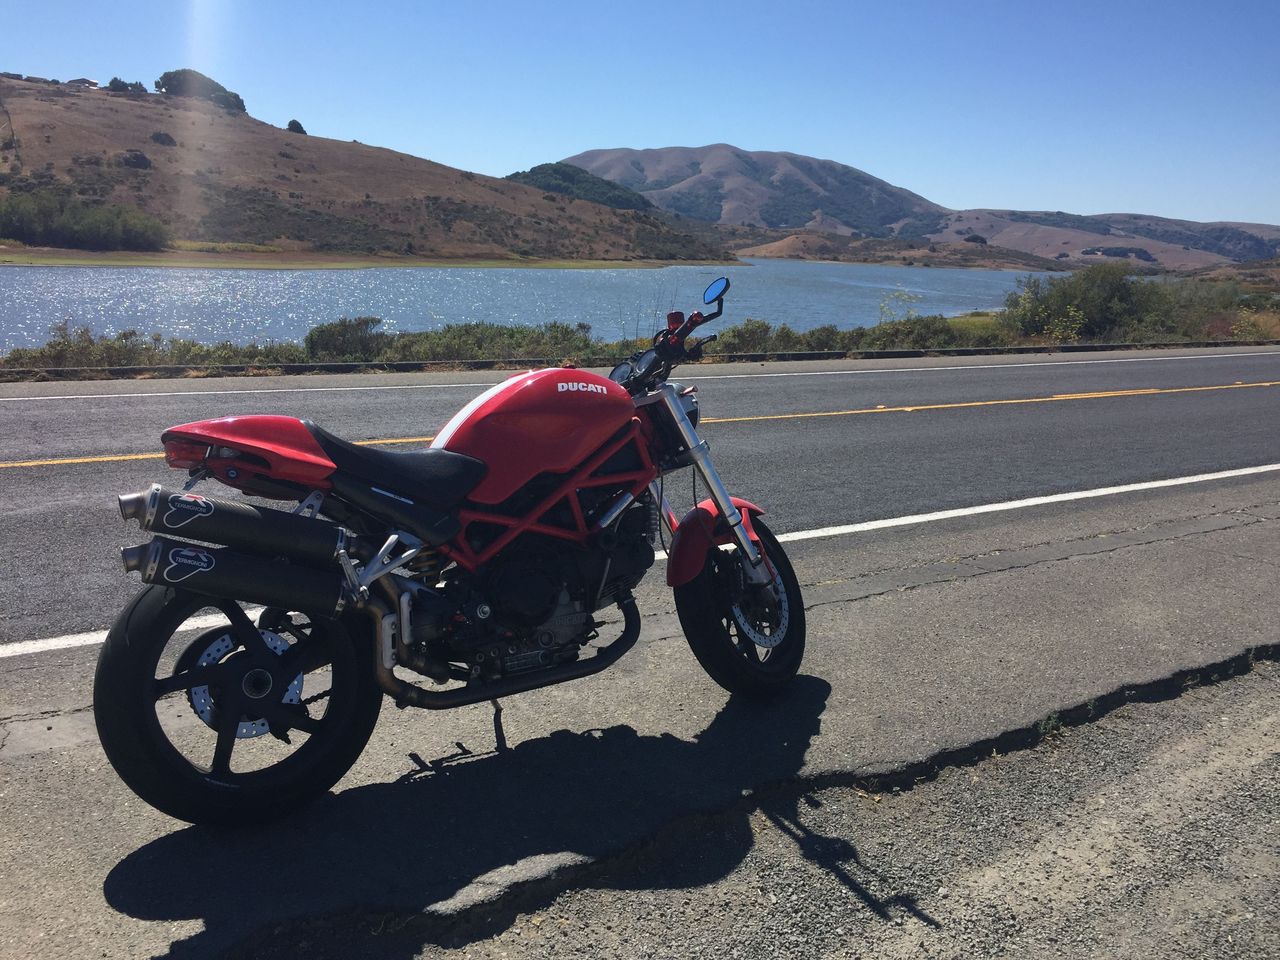 Ducati with Nicasio Reservoir in background